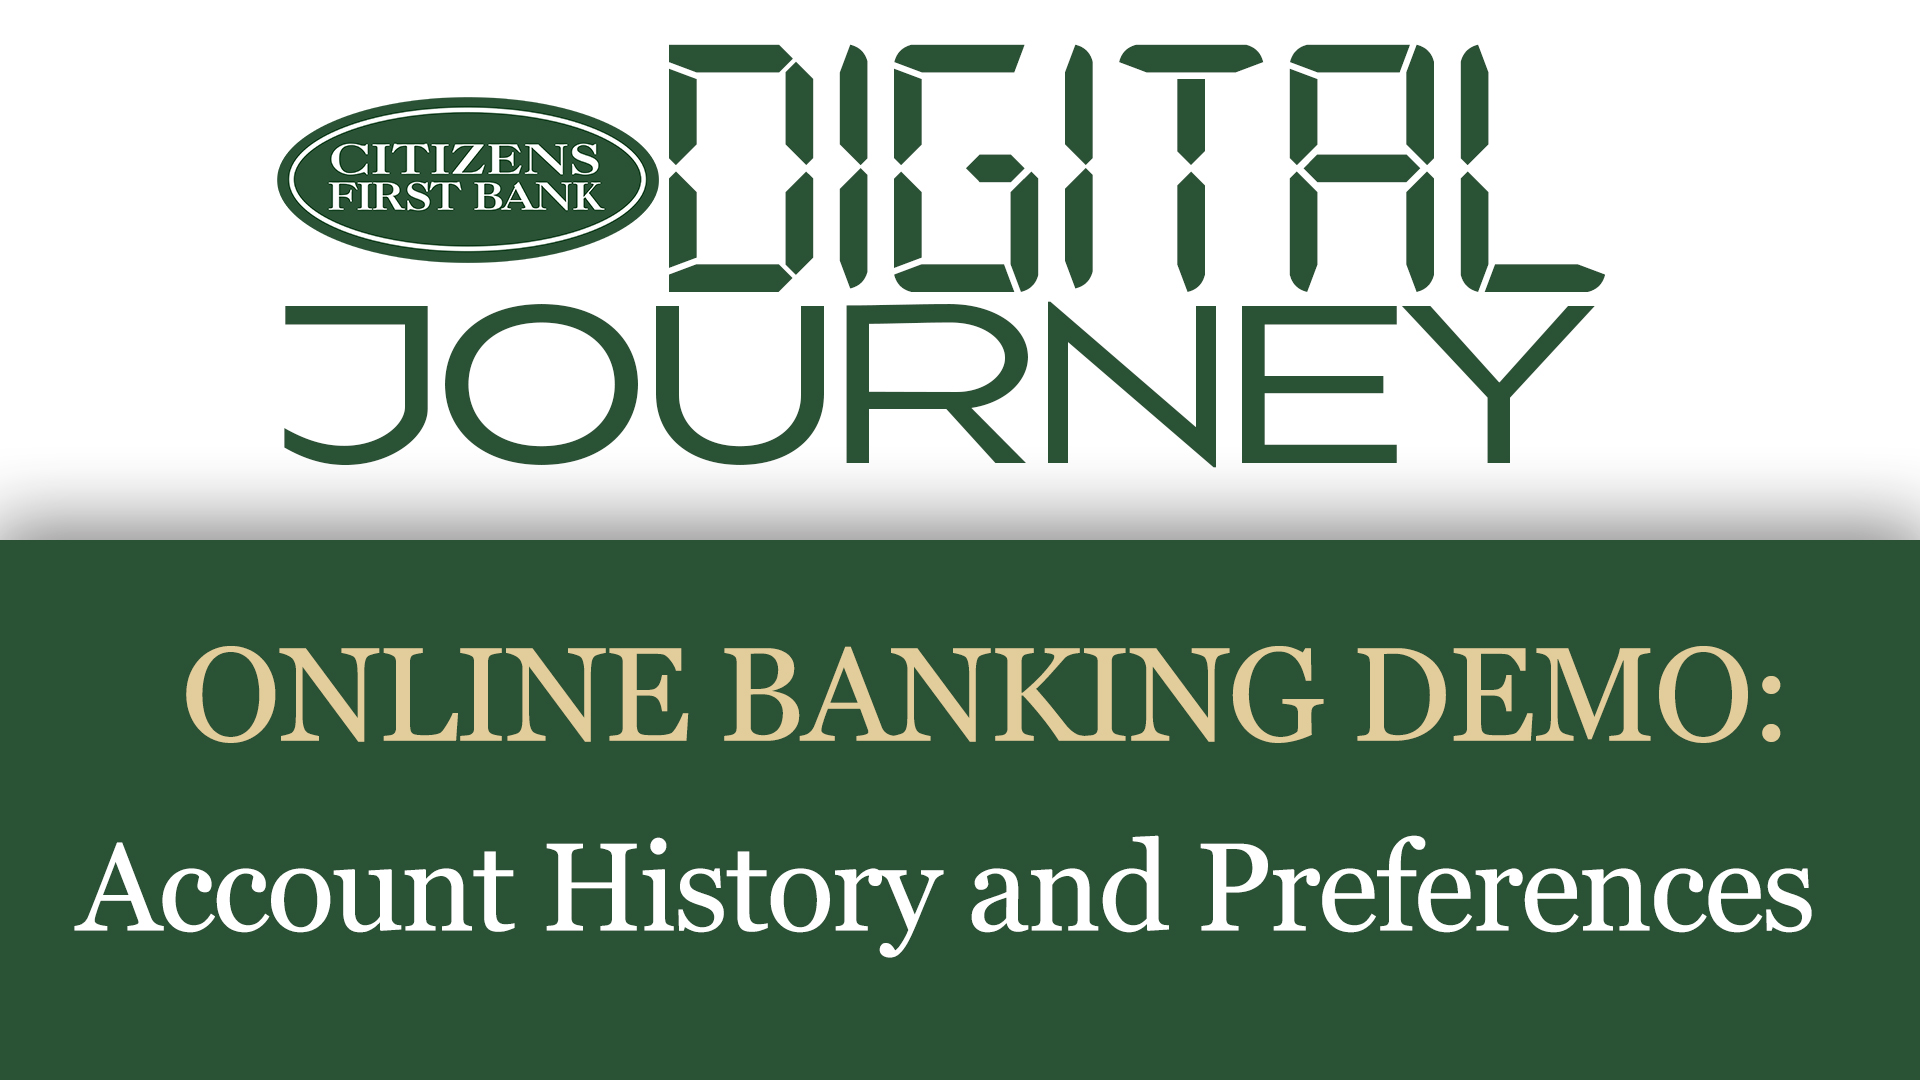 Digital Journey logo with our online banking demo: Account History and Preferences